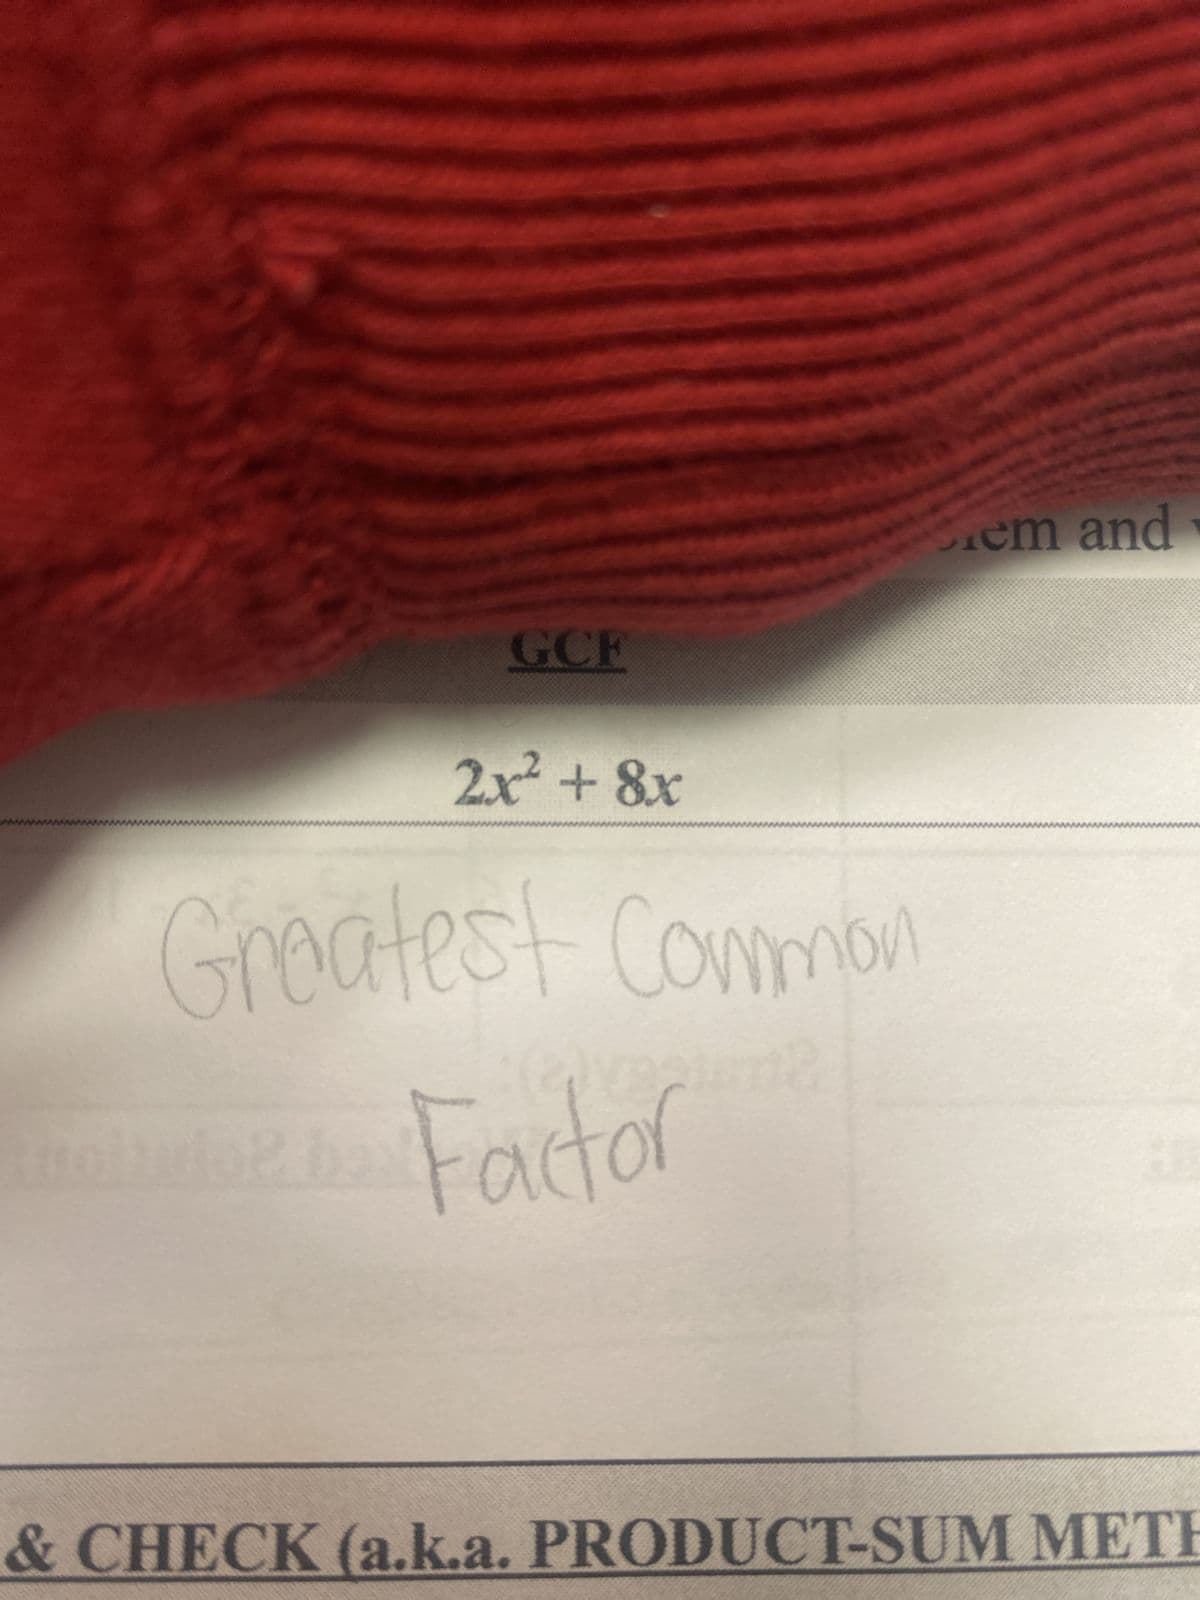 00
GCF
2x² + 8x
Greatest Common
he Factor
em and
& CHECK (a.k.a. PRODUCT-SUM METH